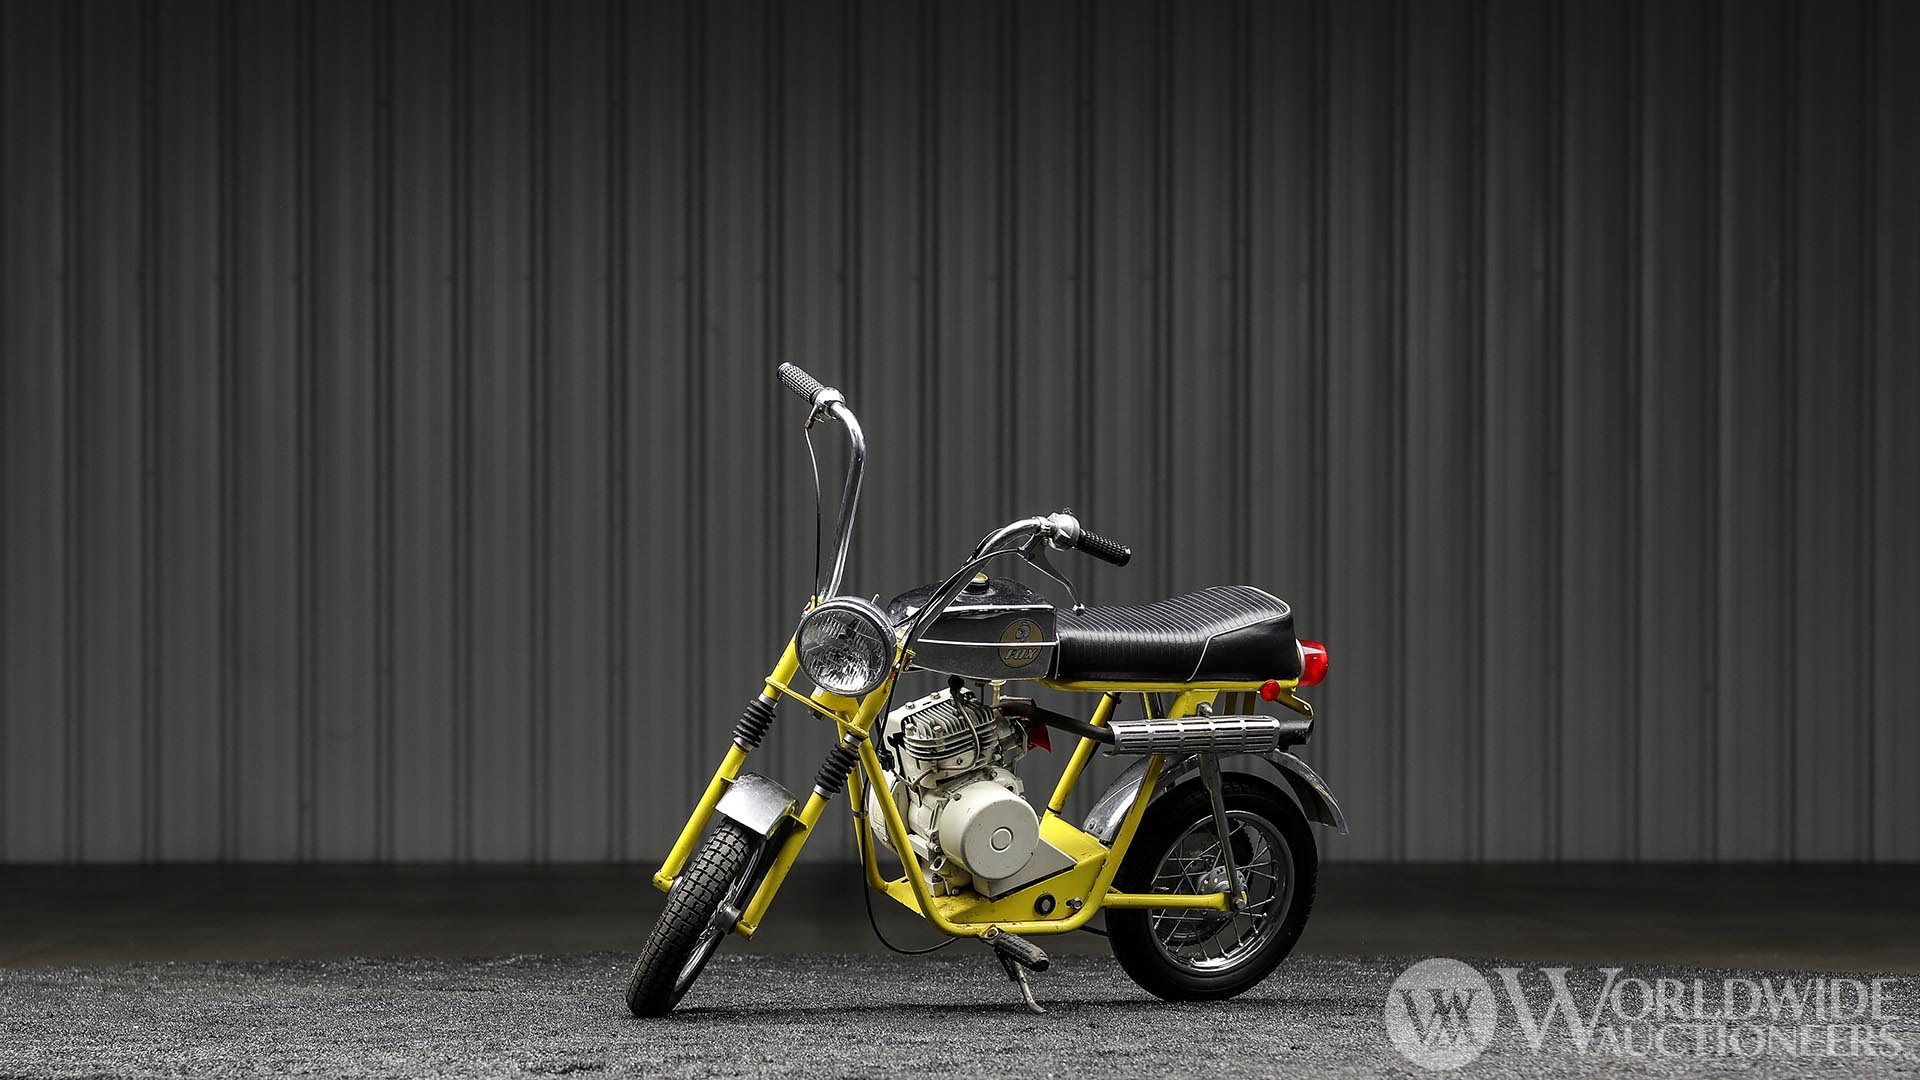 C.-1970-Fox-Mini-Bike-OFFERED-WITHOUT-RESERVE.jpg